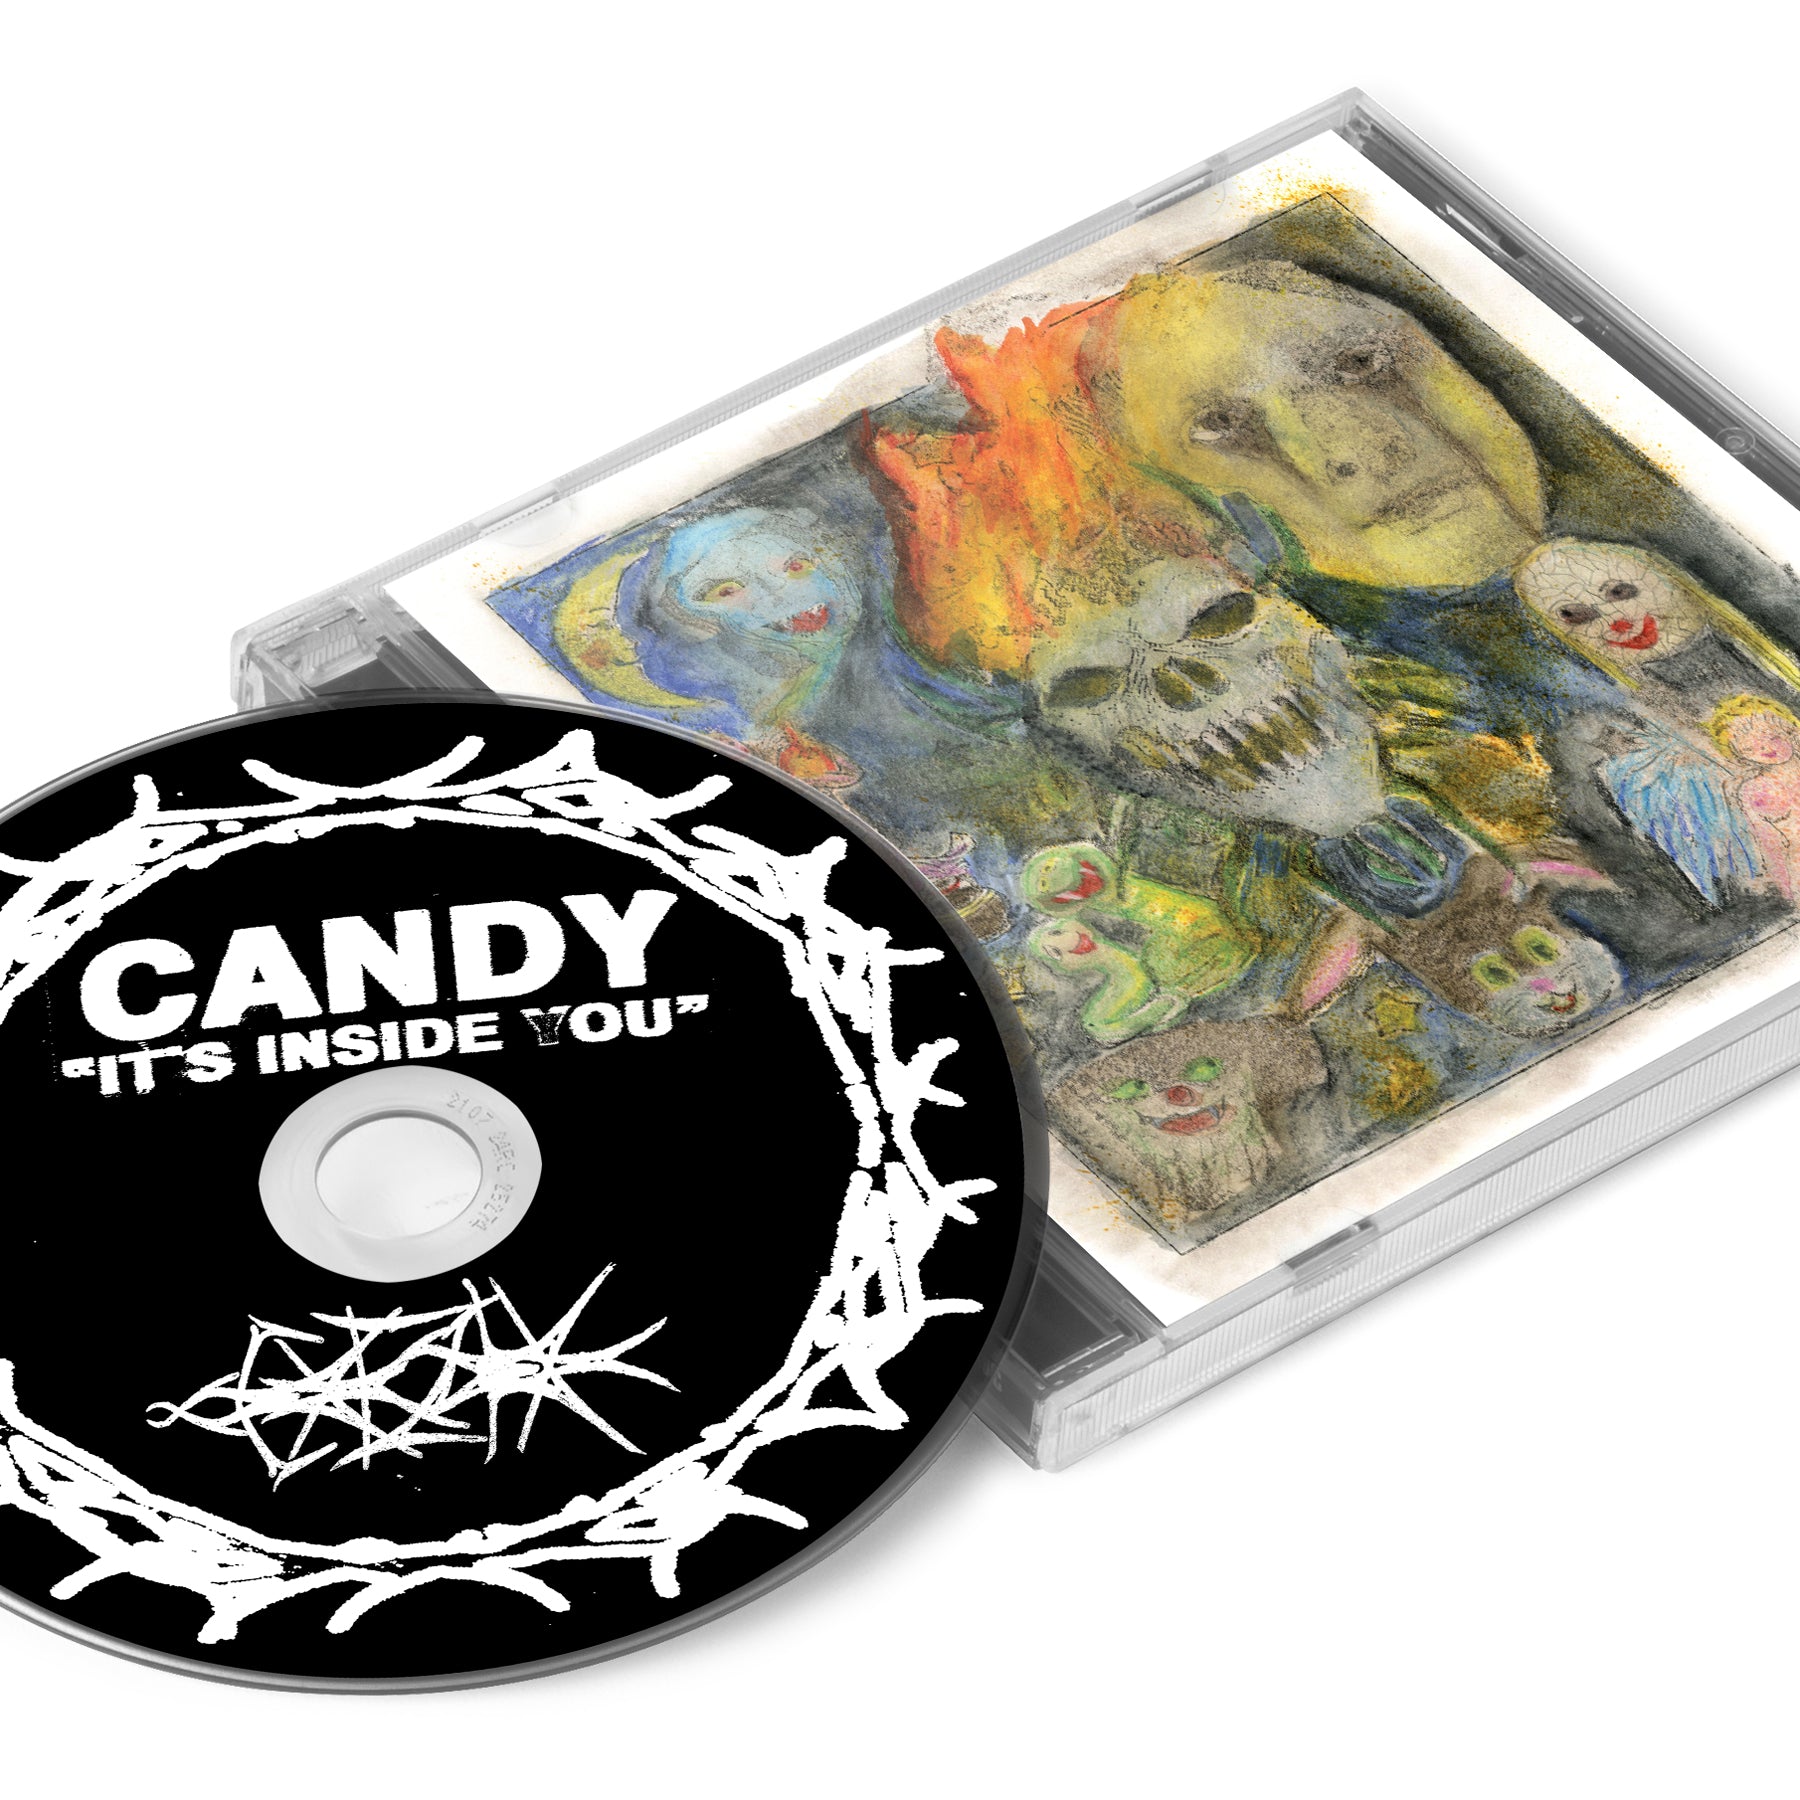 Candy "It's Inside You" CD